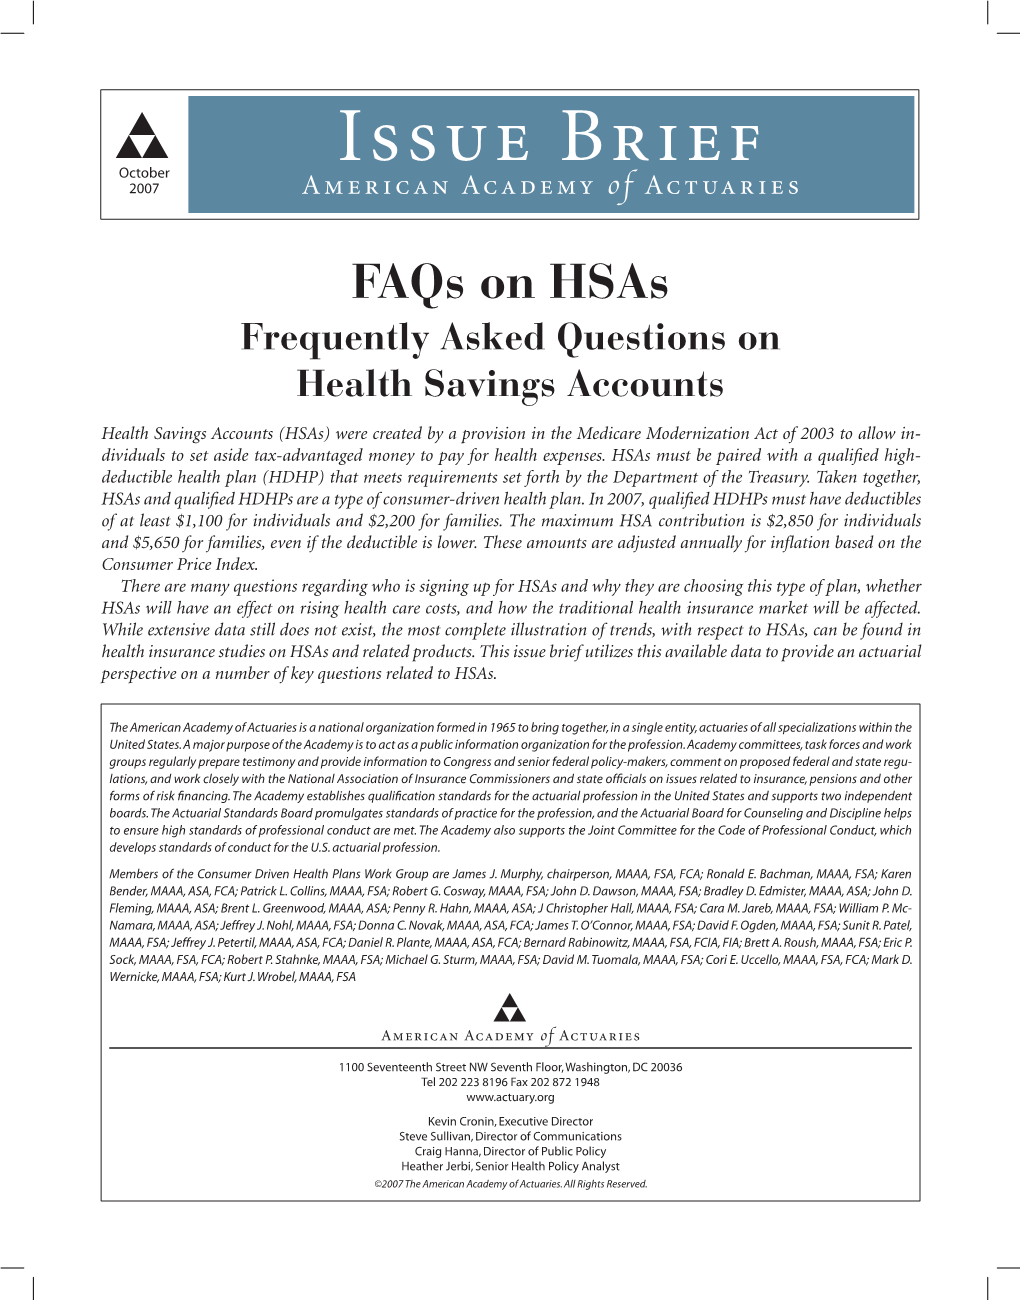 Frequently Asked Questions About Health Savings Accounts (October 2007 Issue Brief)